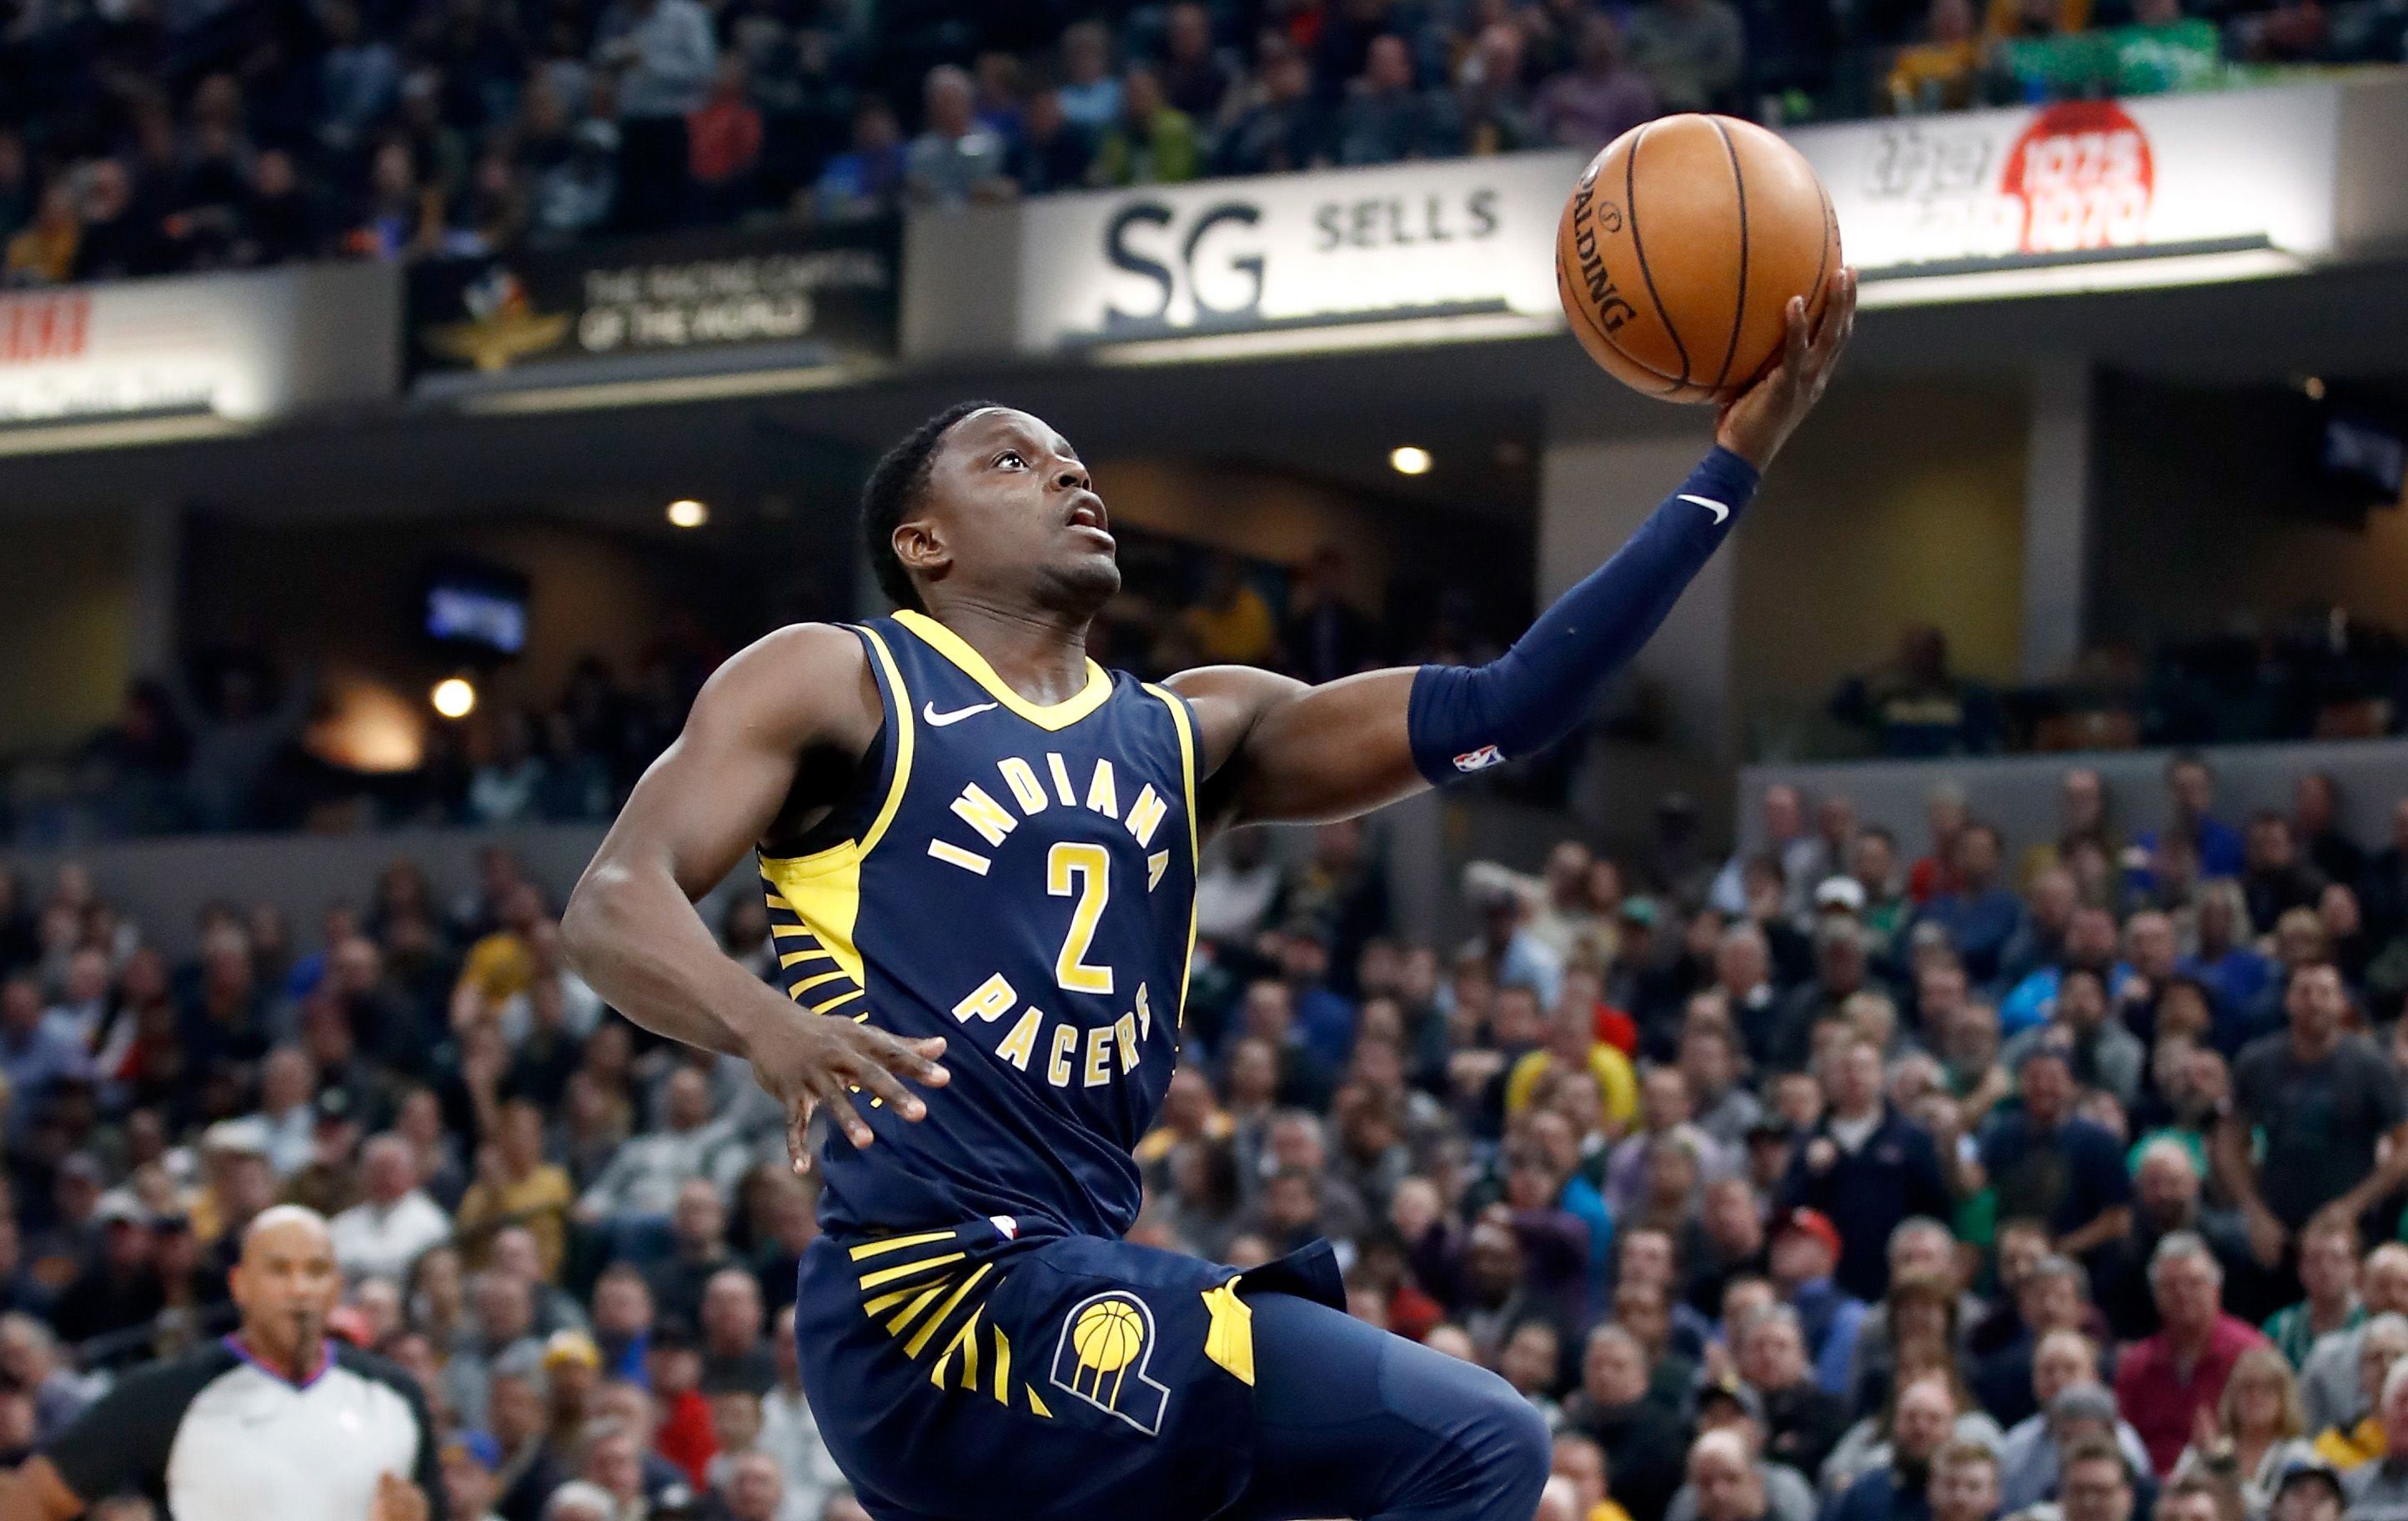 Pacers unveil Indy 500 themed uniforms as part of their 'City